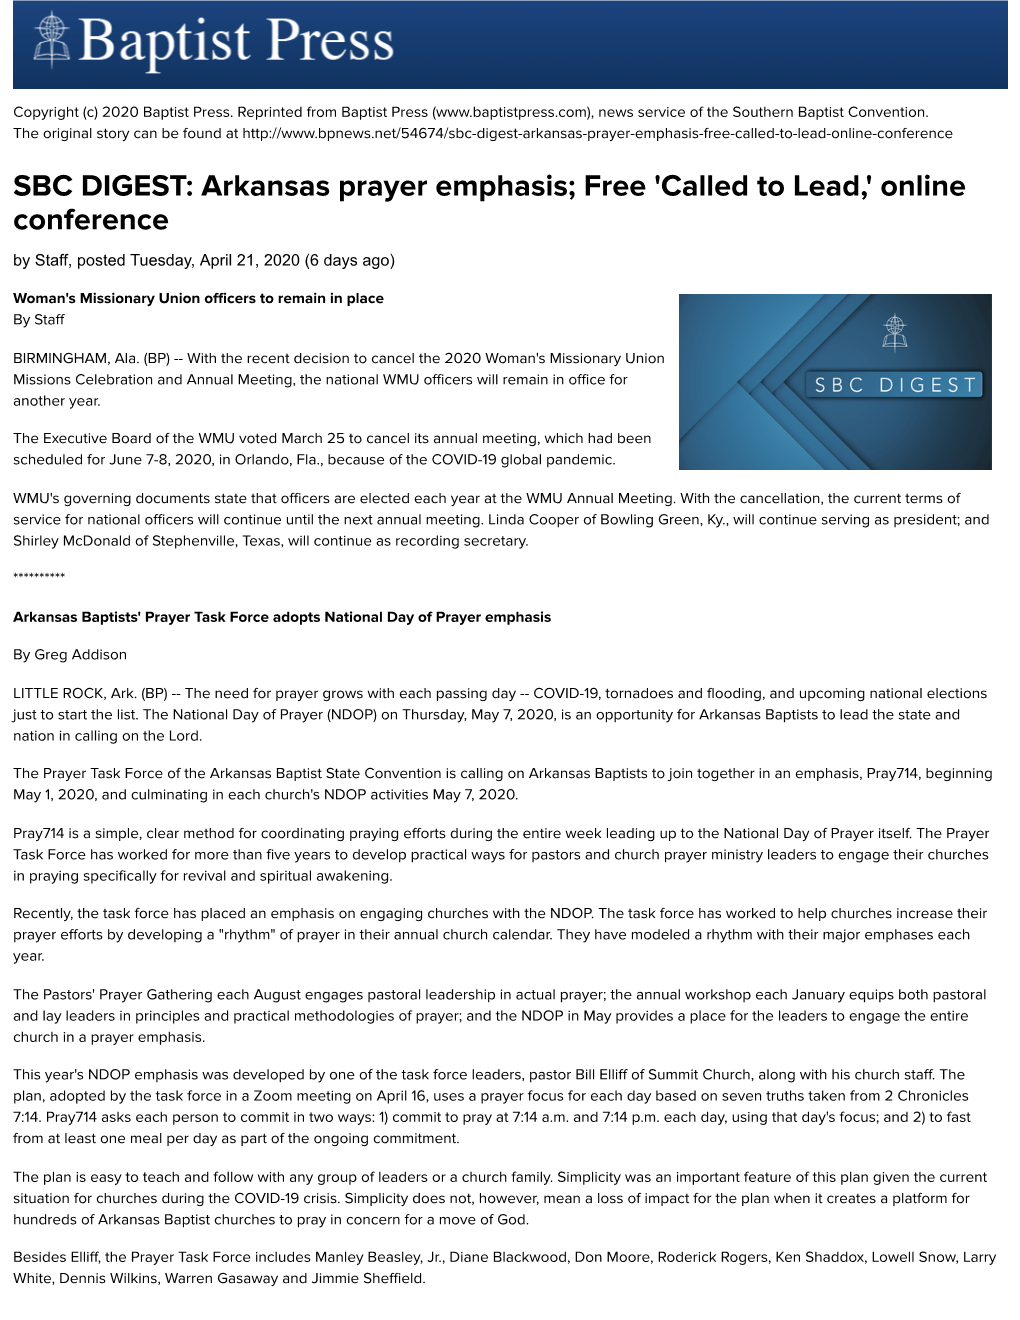 Arkansas Prayer Emphasis; Free 'Called to Lead,' Online Conference by Staff, Posted Tuesday, April 21, 2020 (6 Days Ago)